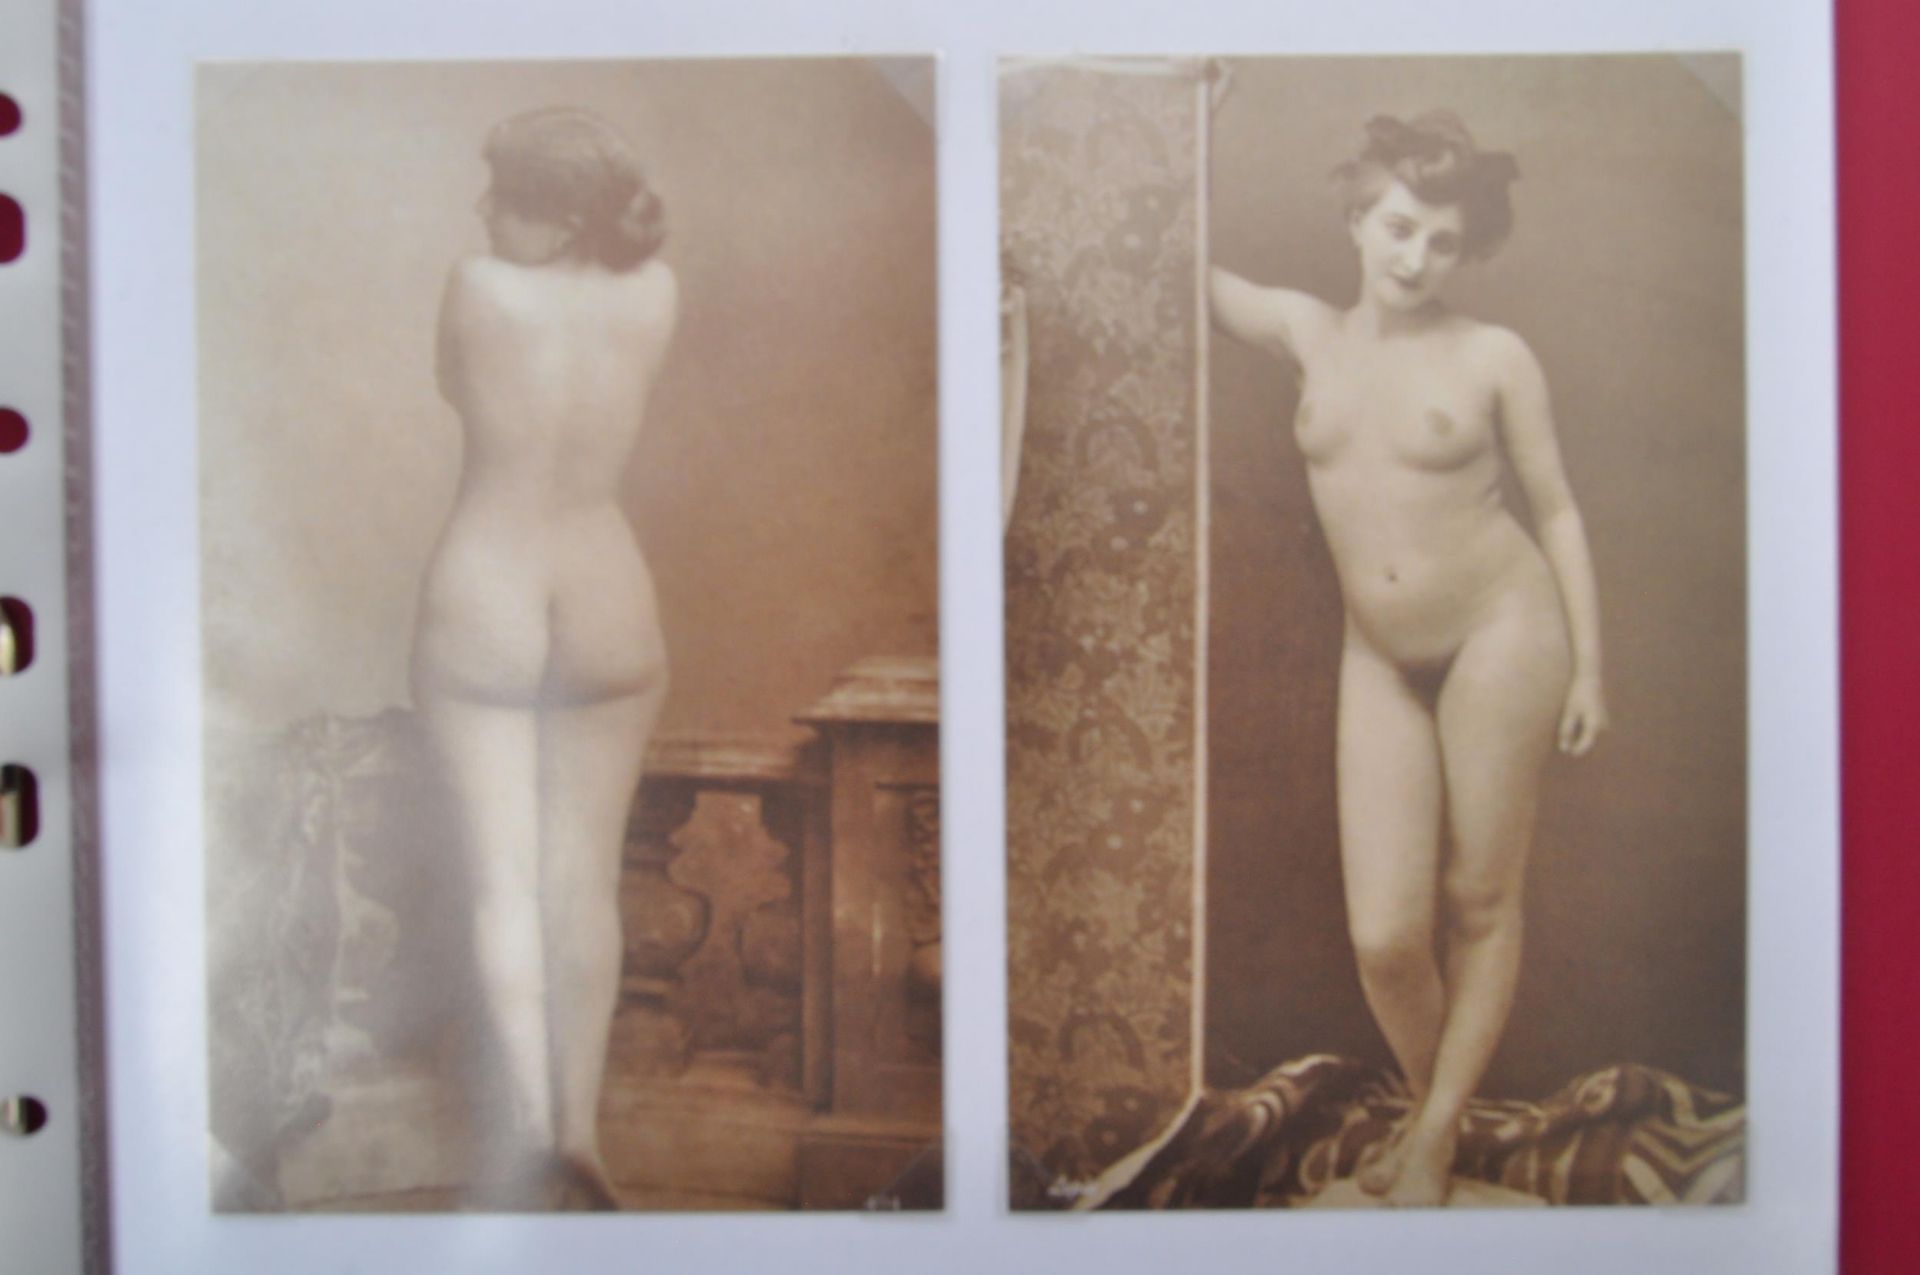 COLLECTION OF 20TH CENTURY FRENCH EROTIC NUDE POSTCARDS - Image 6 of 7